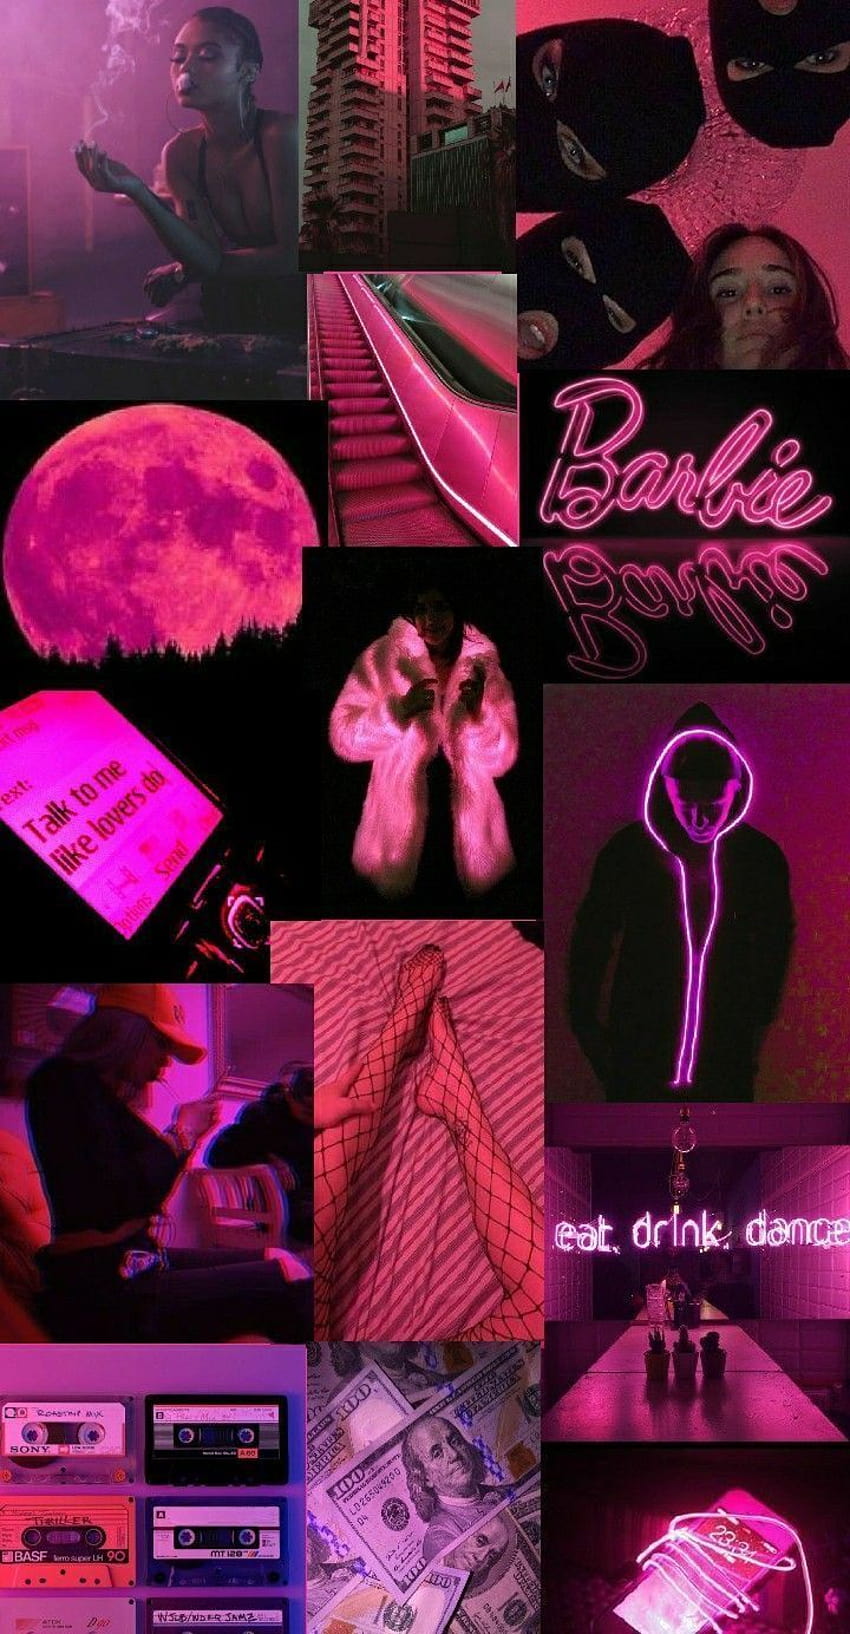 Aesthetic background of pink and purple images - Baddie, Barbie